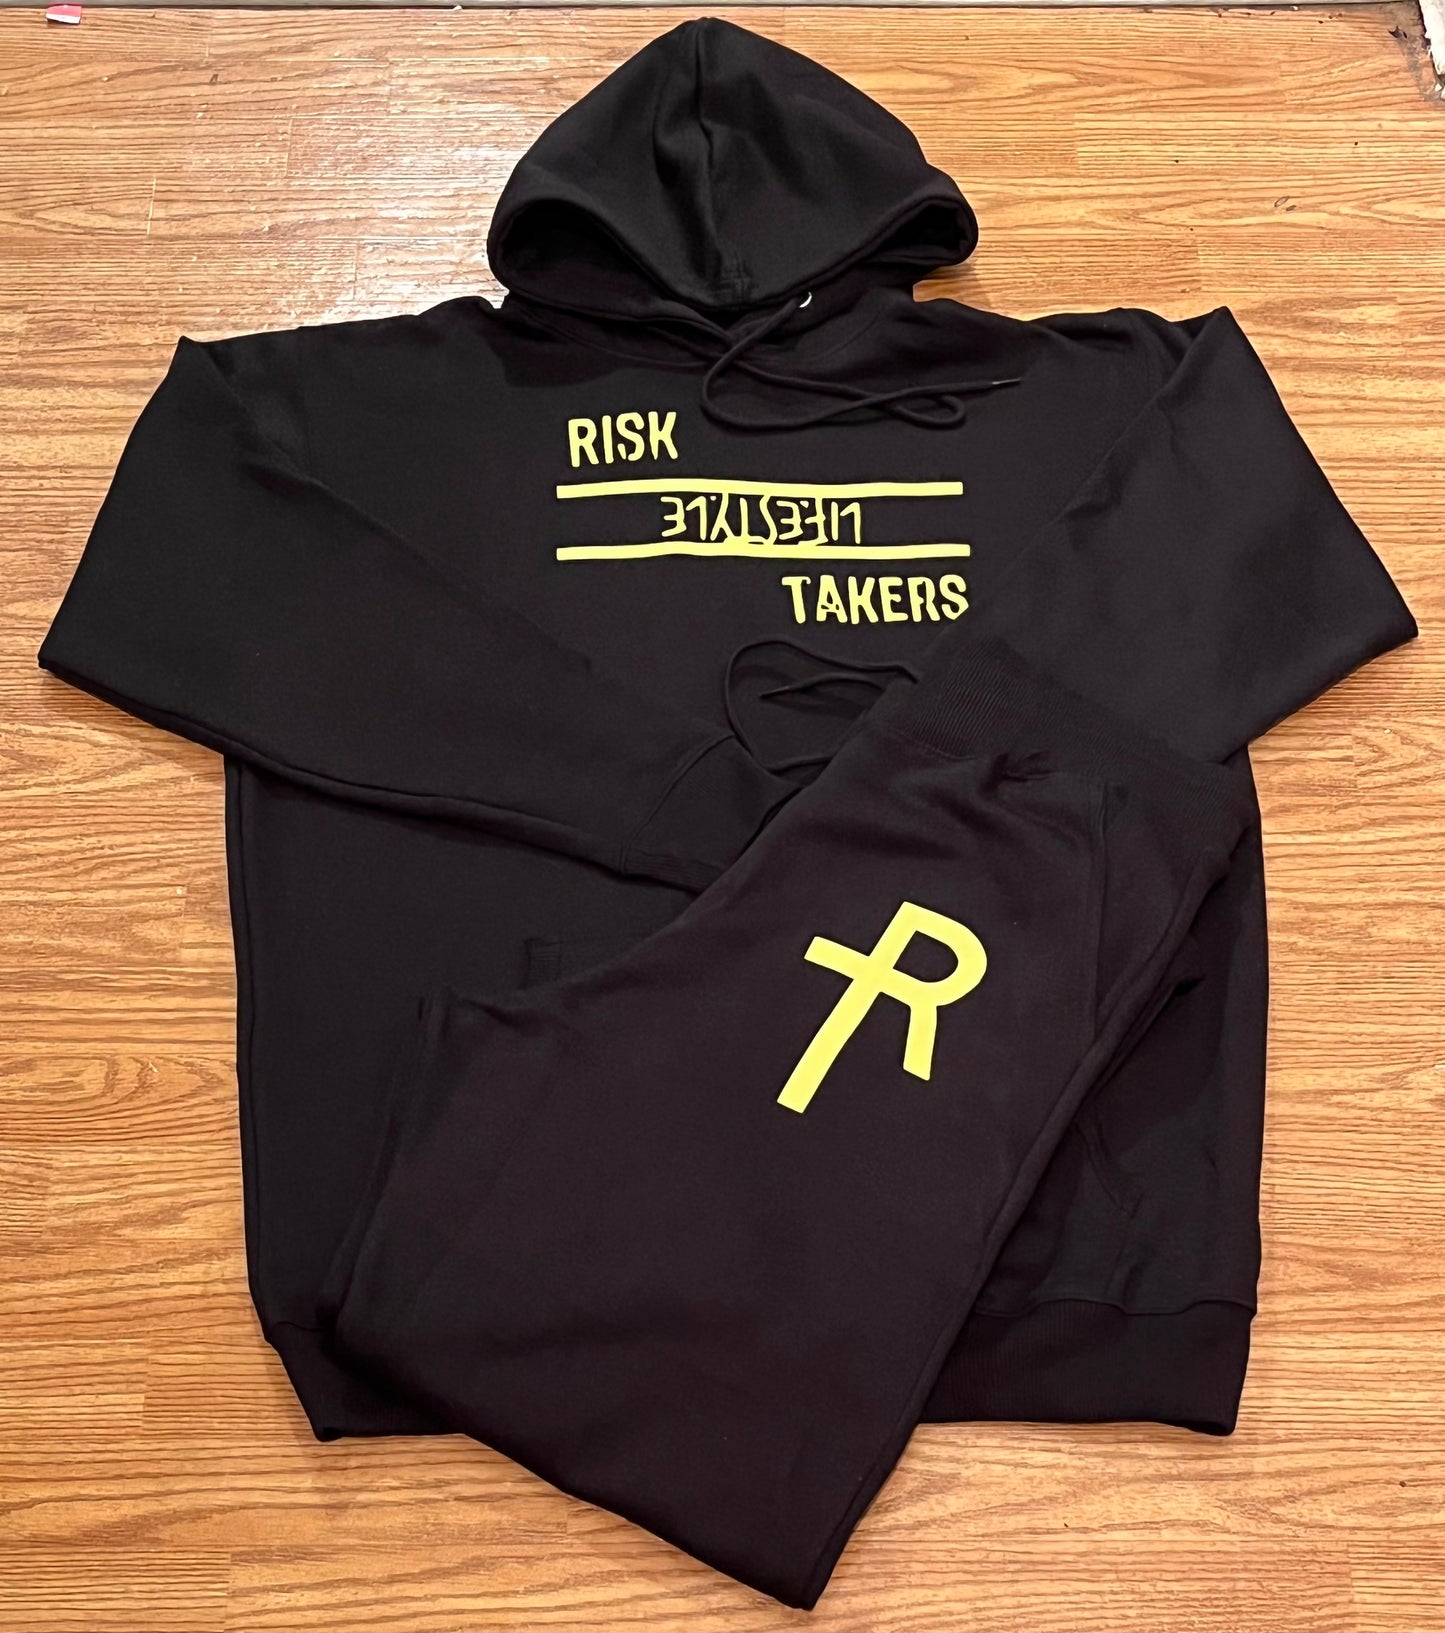 Risk Takers Lifestyle Hoodies